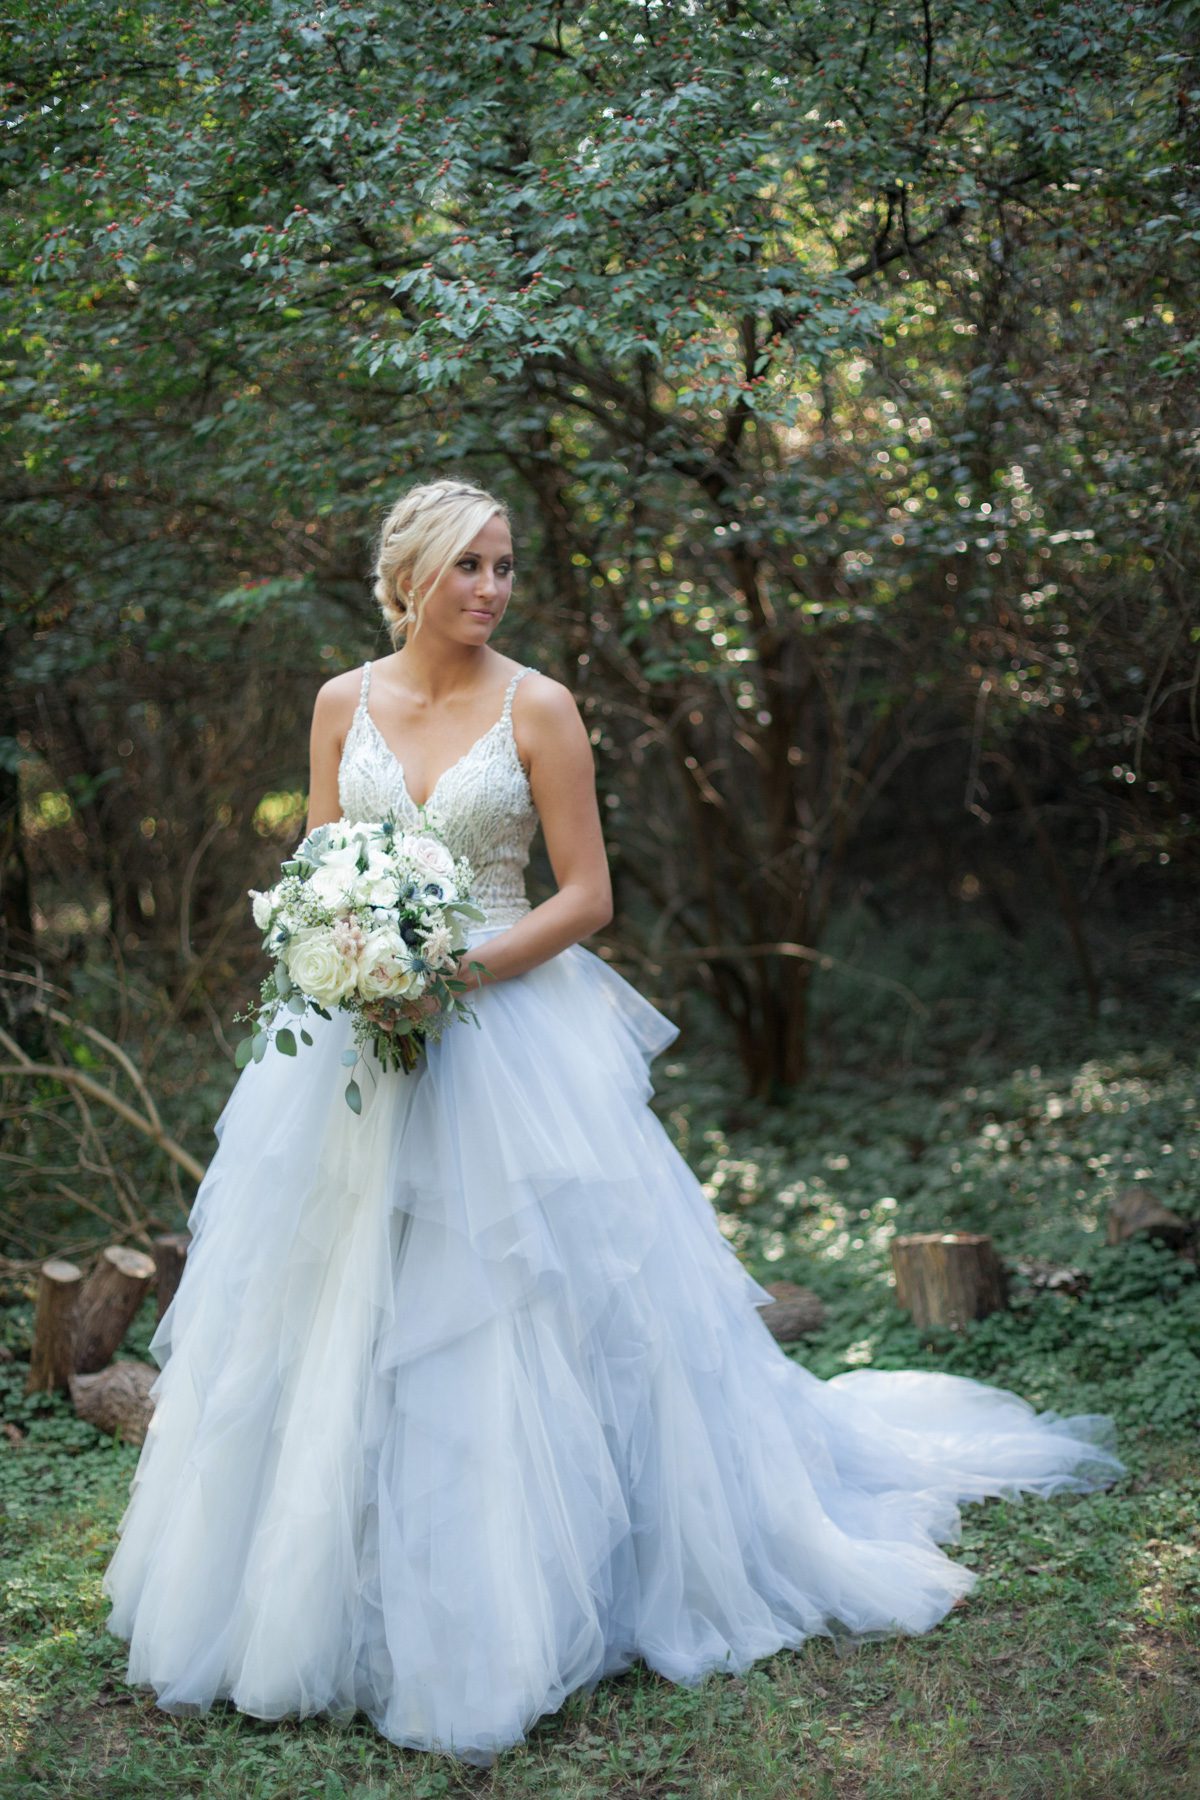 Photo of bride before wedding ceremony. Wedding photography at Cedarwood Weddings and Estate in Nashville, TN photography by Krista Lee Photography